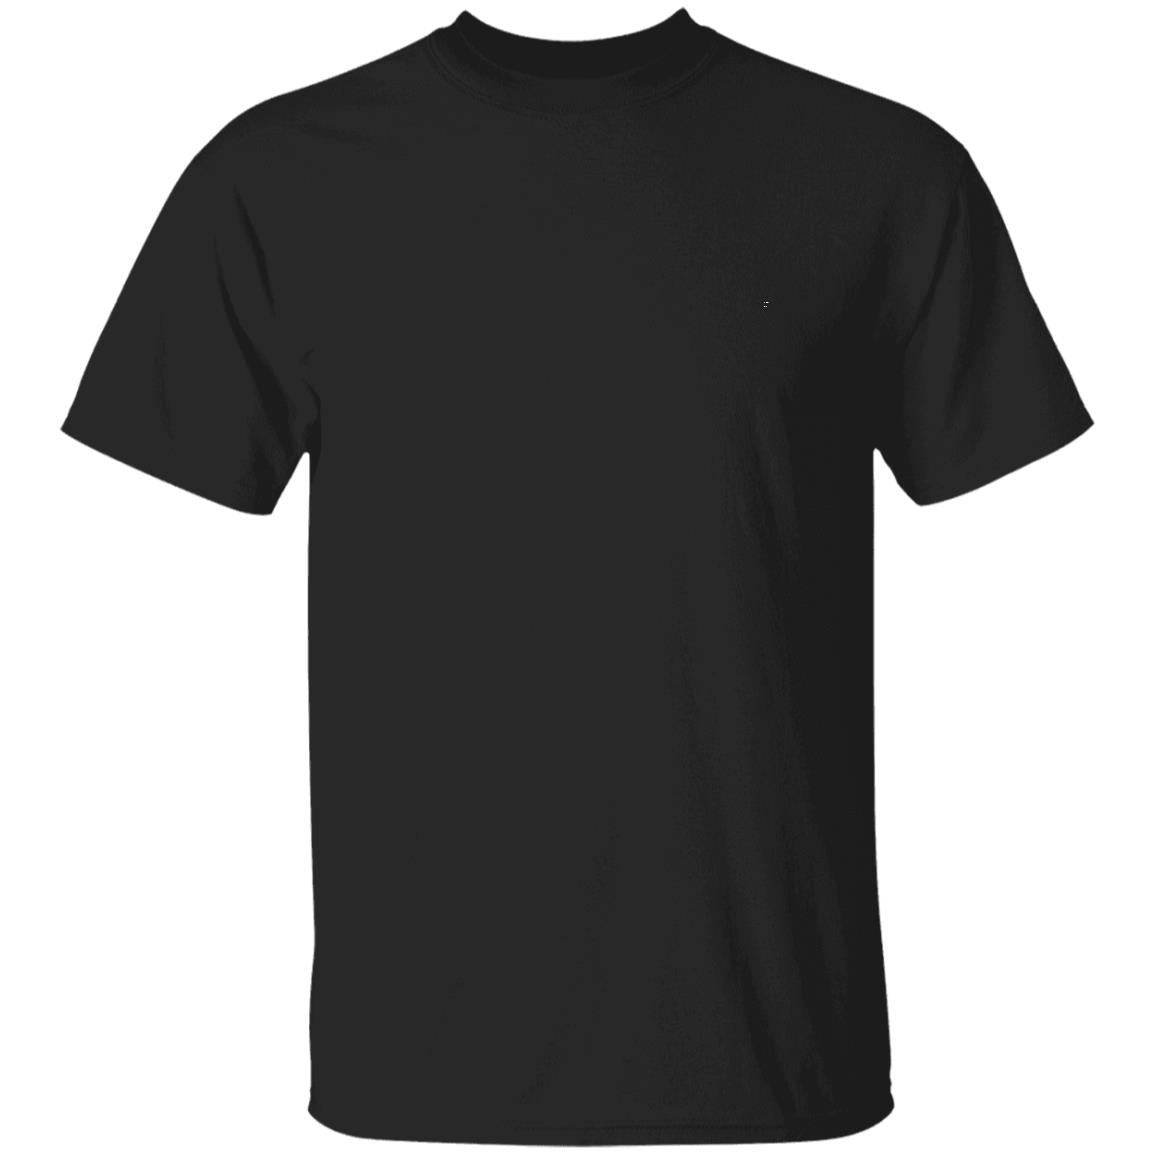 Black t-shirt is blank on the front and is heavyweight fabric in classic unisex fit made from 100% cotton.